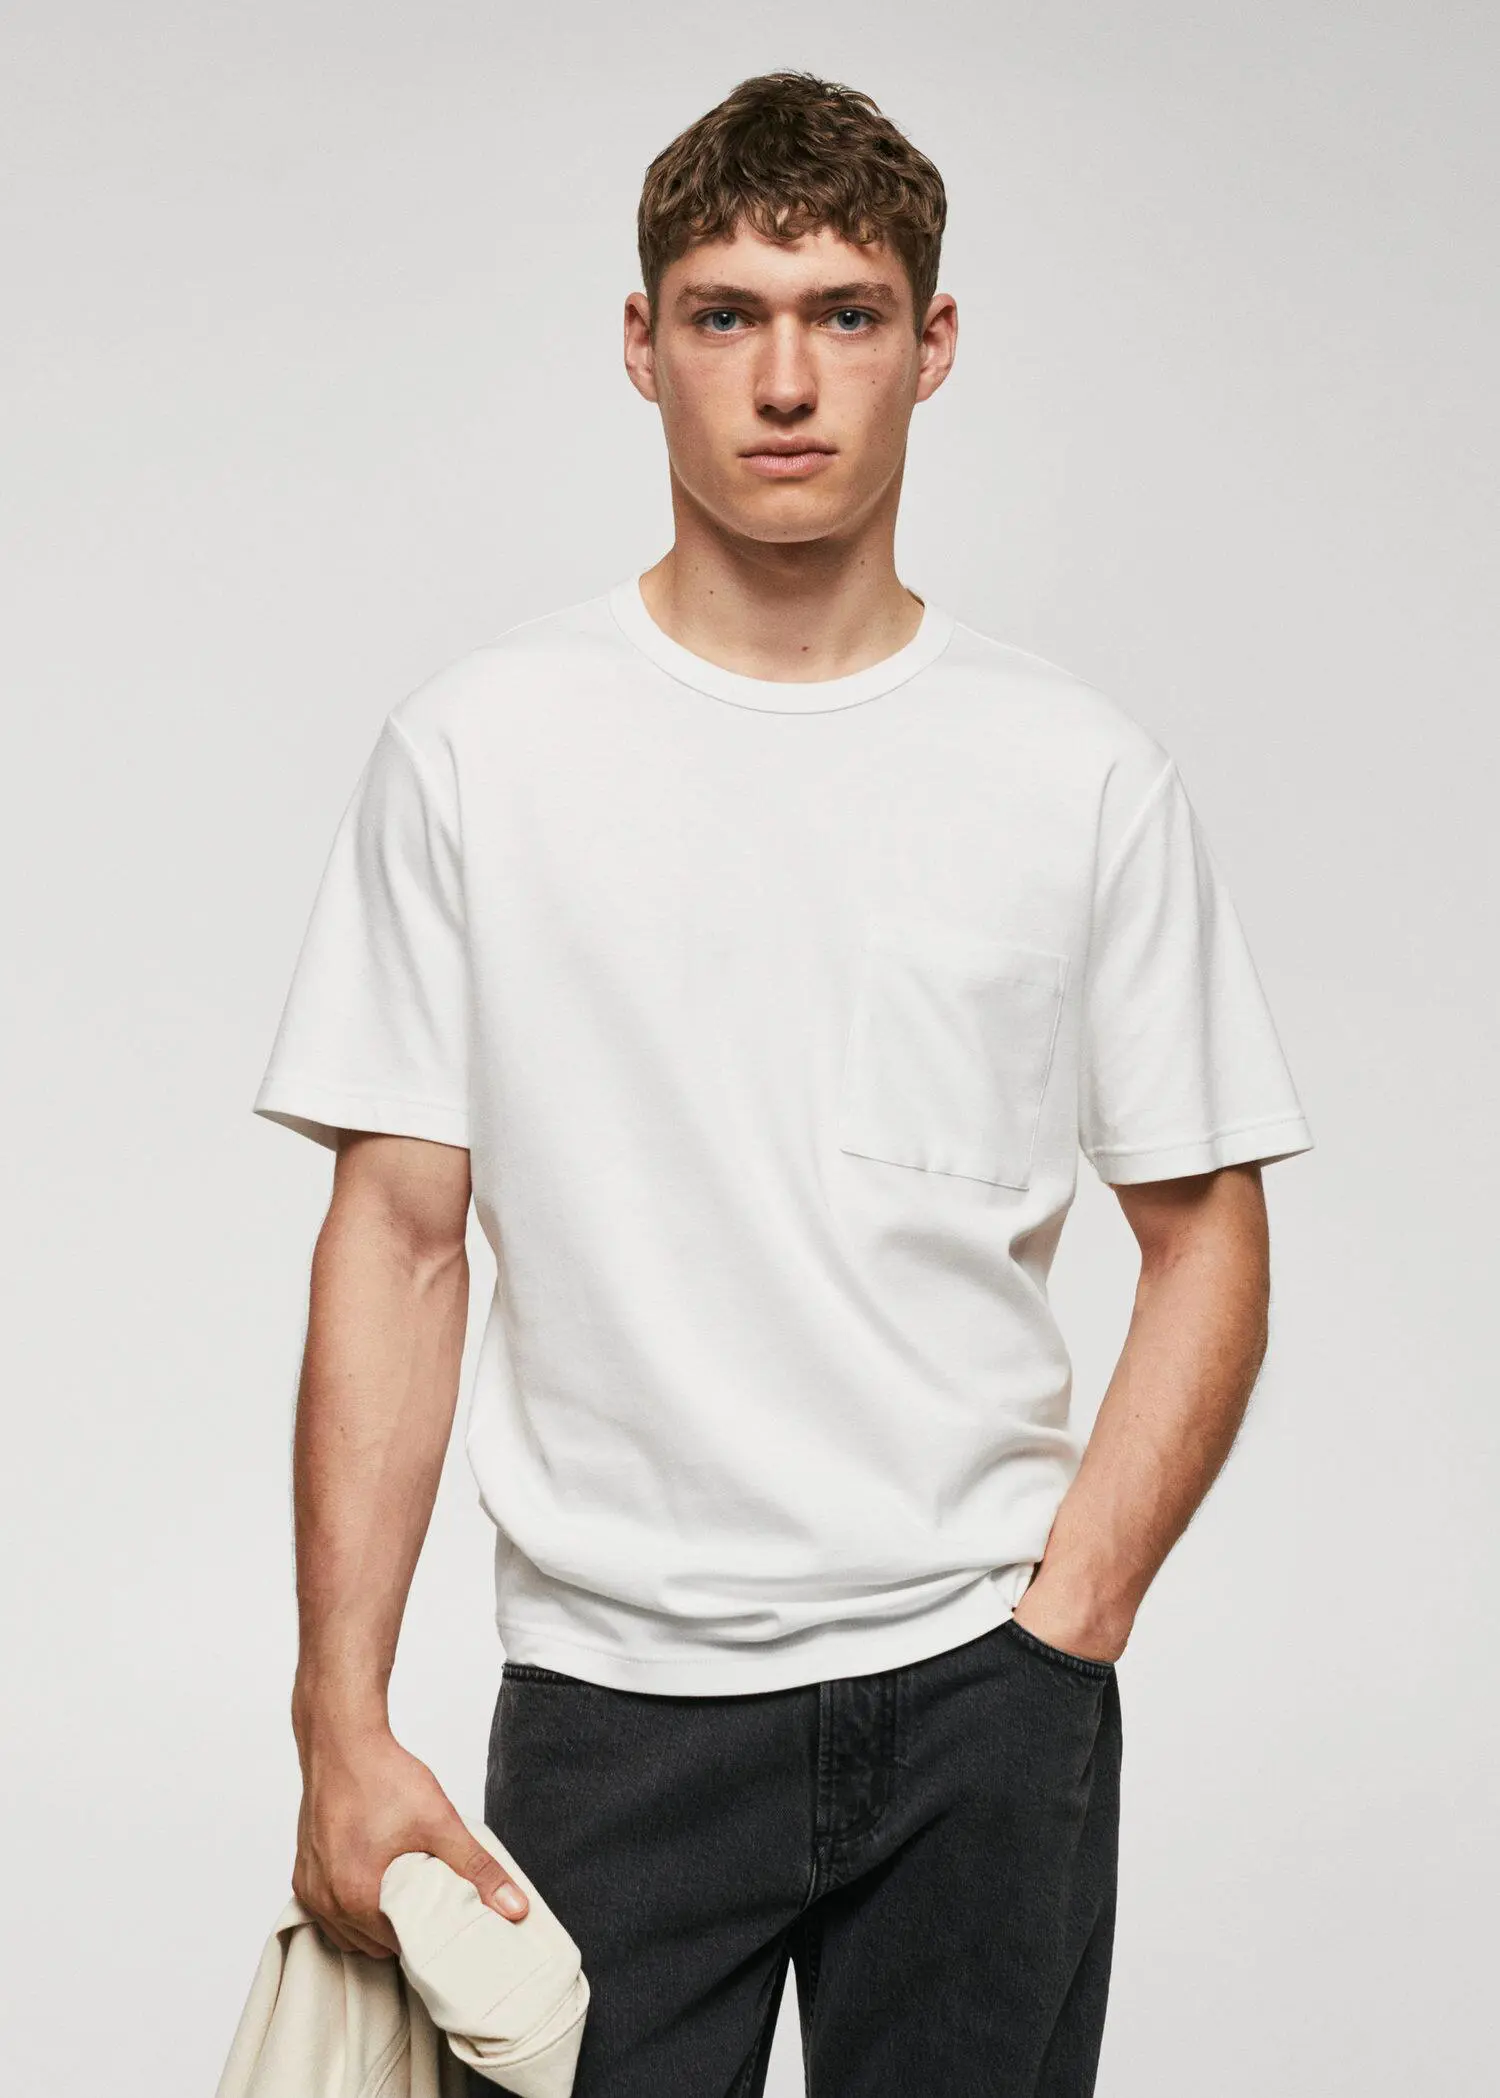 Mango 100% cotton t-shirt with pocket. a man wearing a white t-shirt and black jeans. 